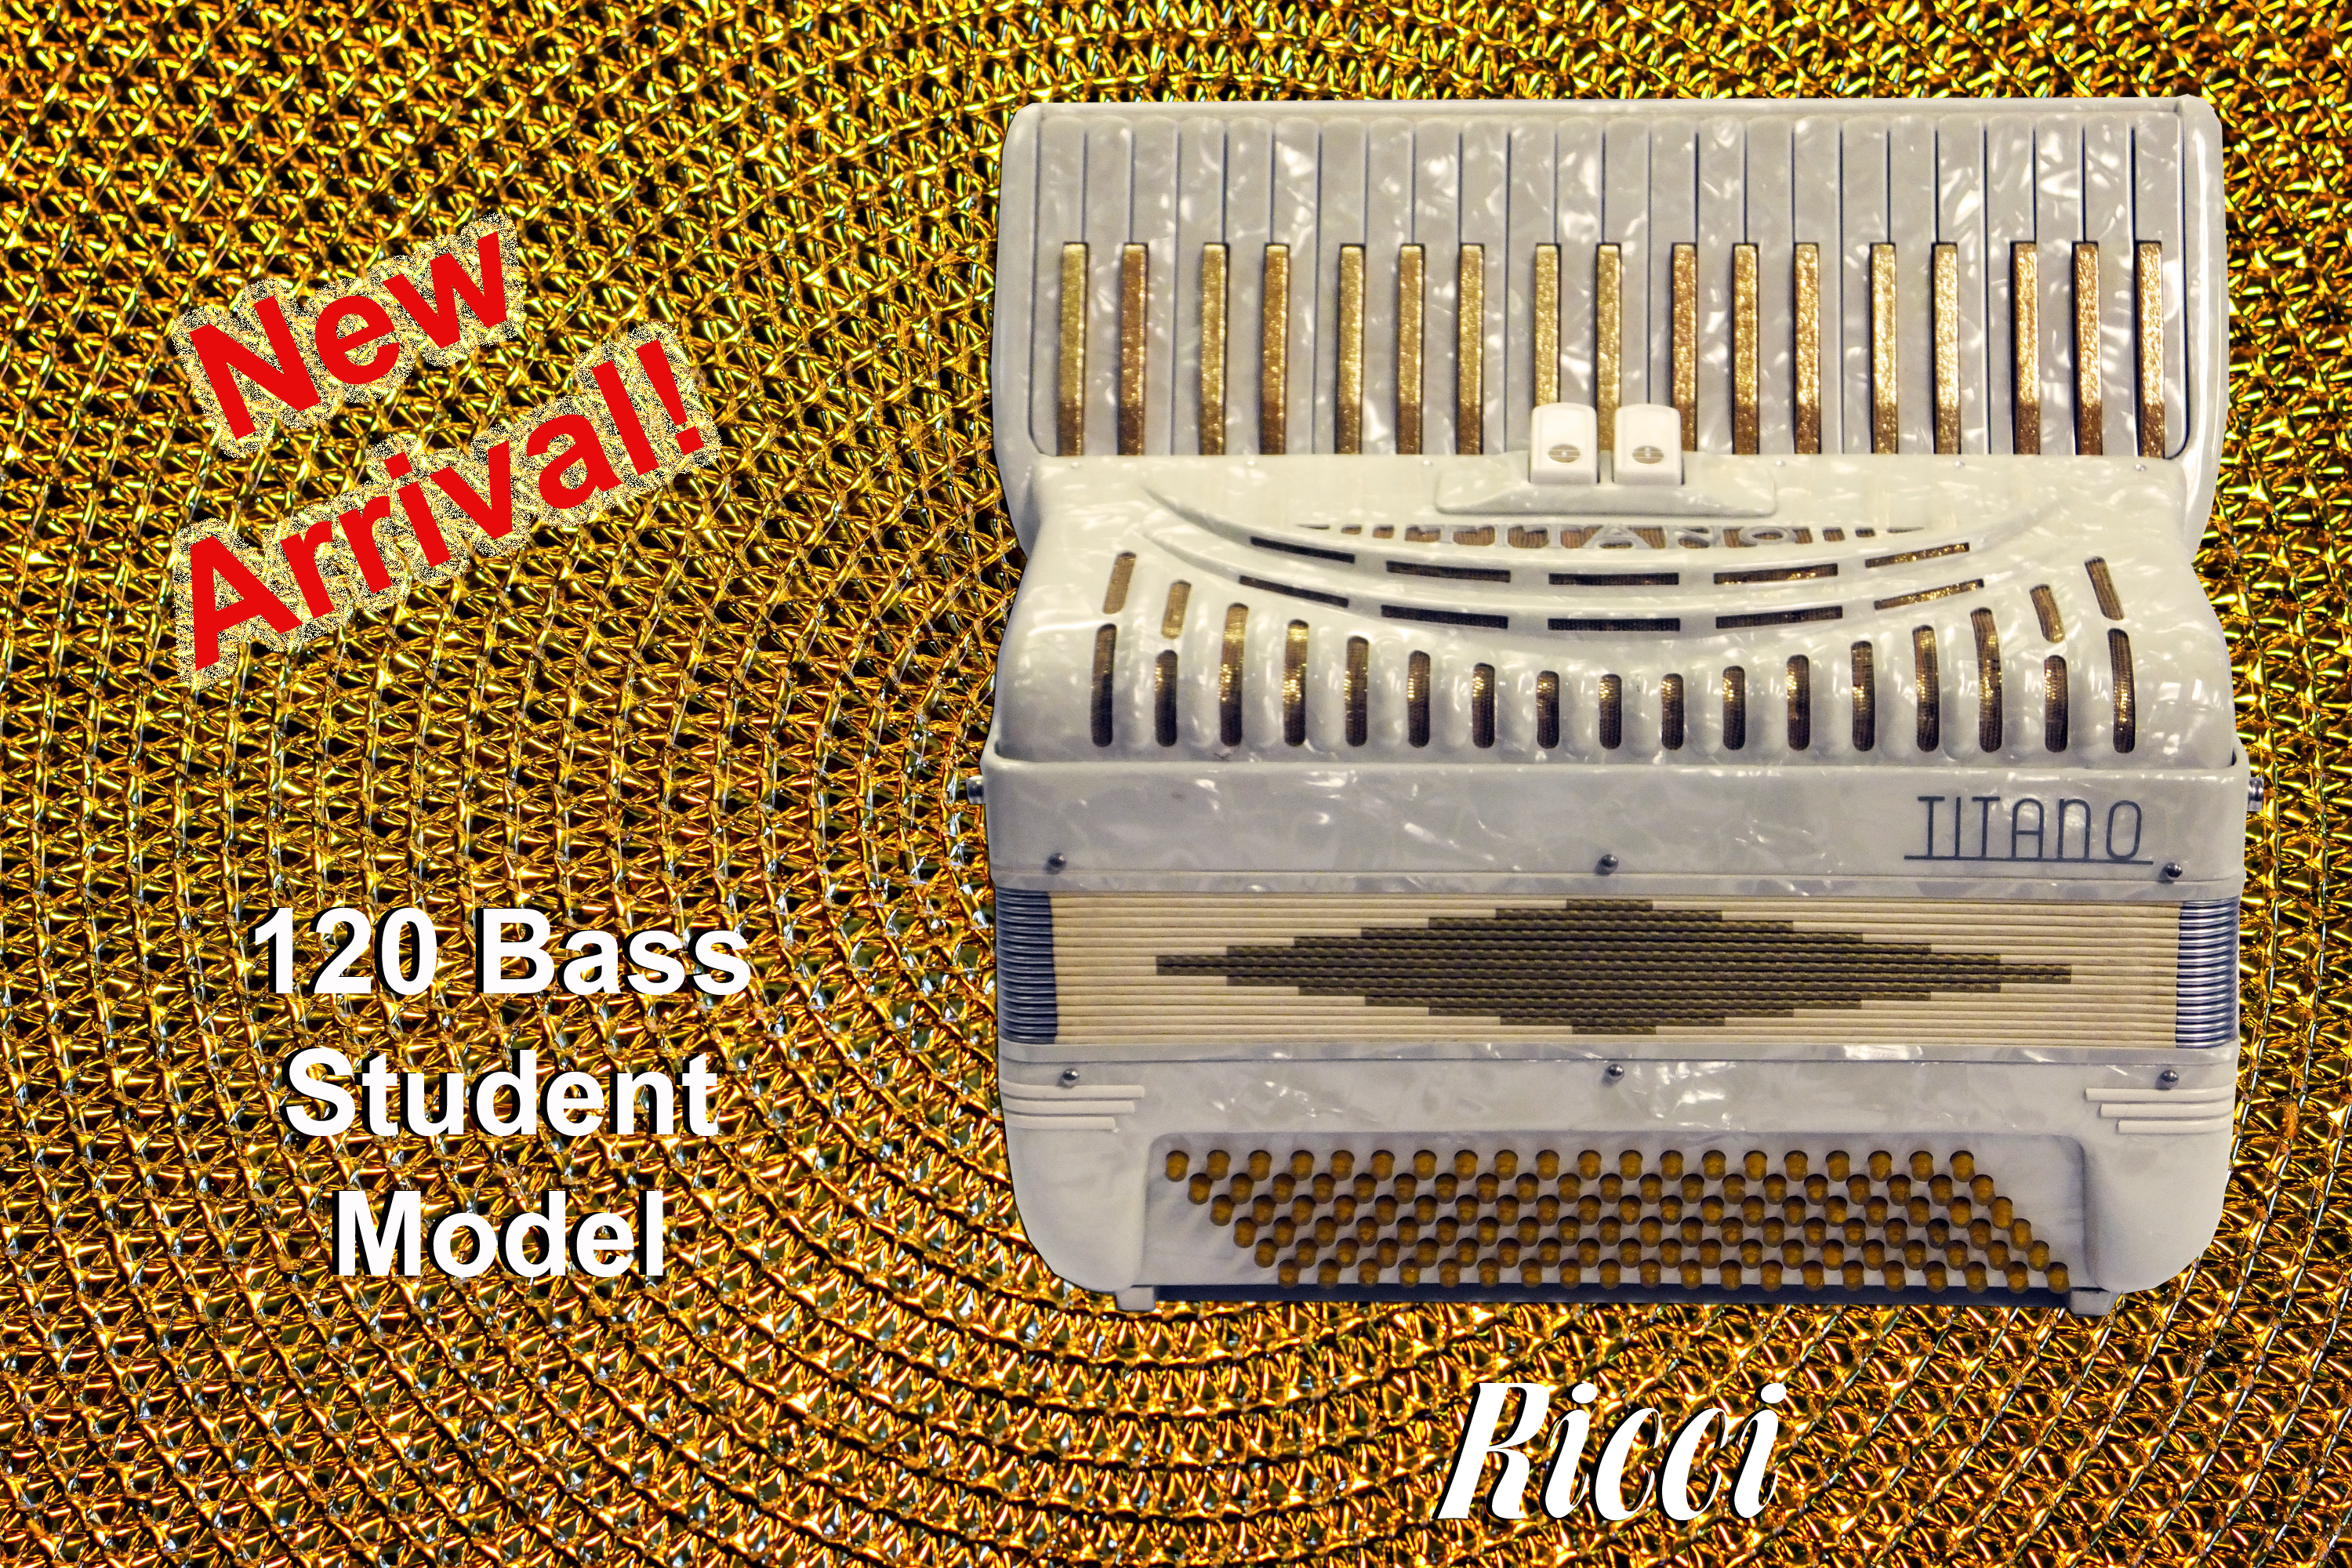 Titano Accordion 120 Bass Student Model Up For Adoption